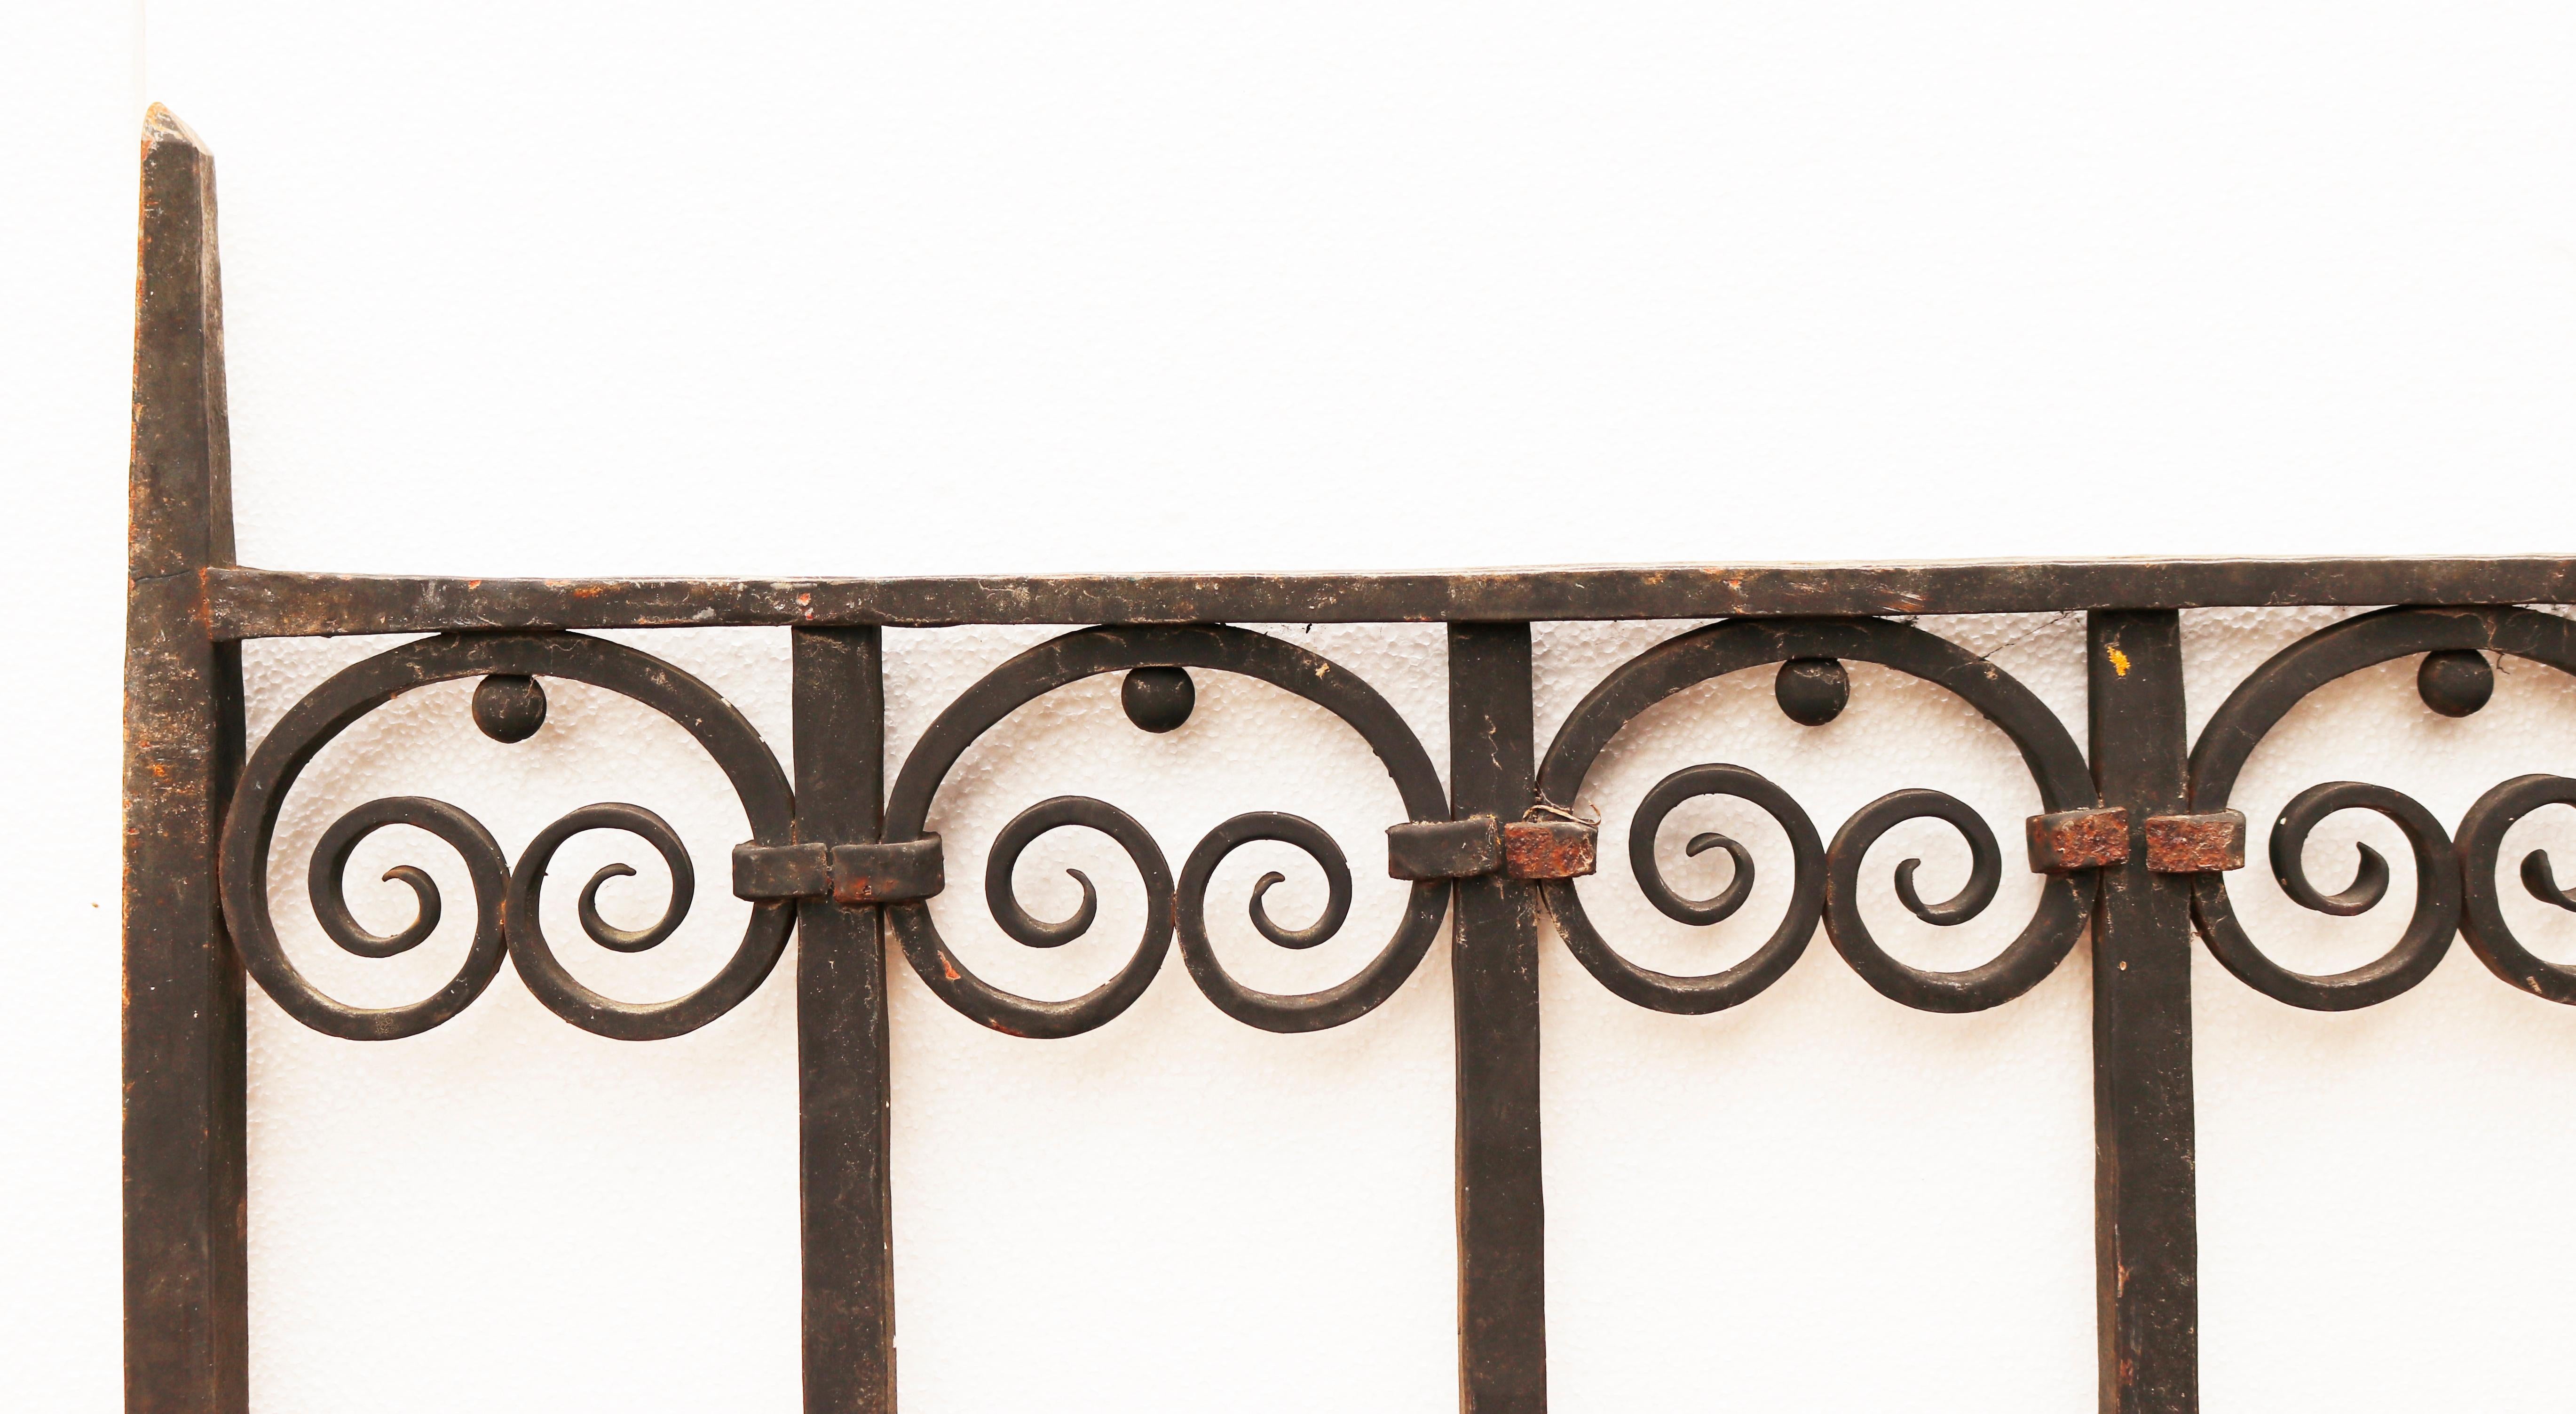 Decorative Wrought Iron Garden Gate. A beautiful gate with detailed scrolls along the top, and flower motifs along the bottom.

What is Wrought Iron?

Wrought iron is a type of refined, low carbon iron that is smelted and worked on with tools. The